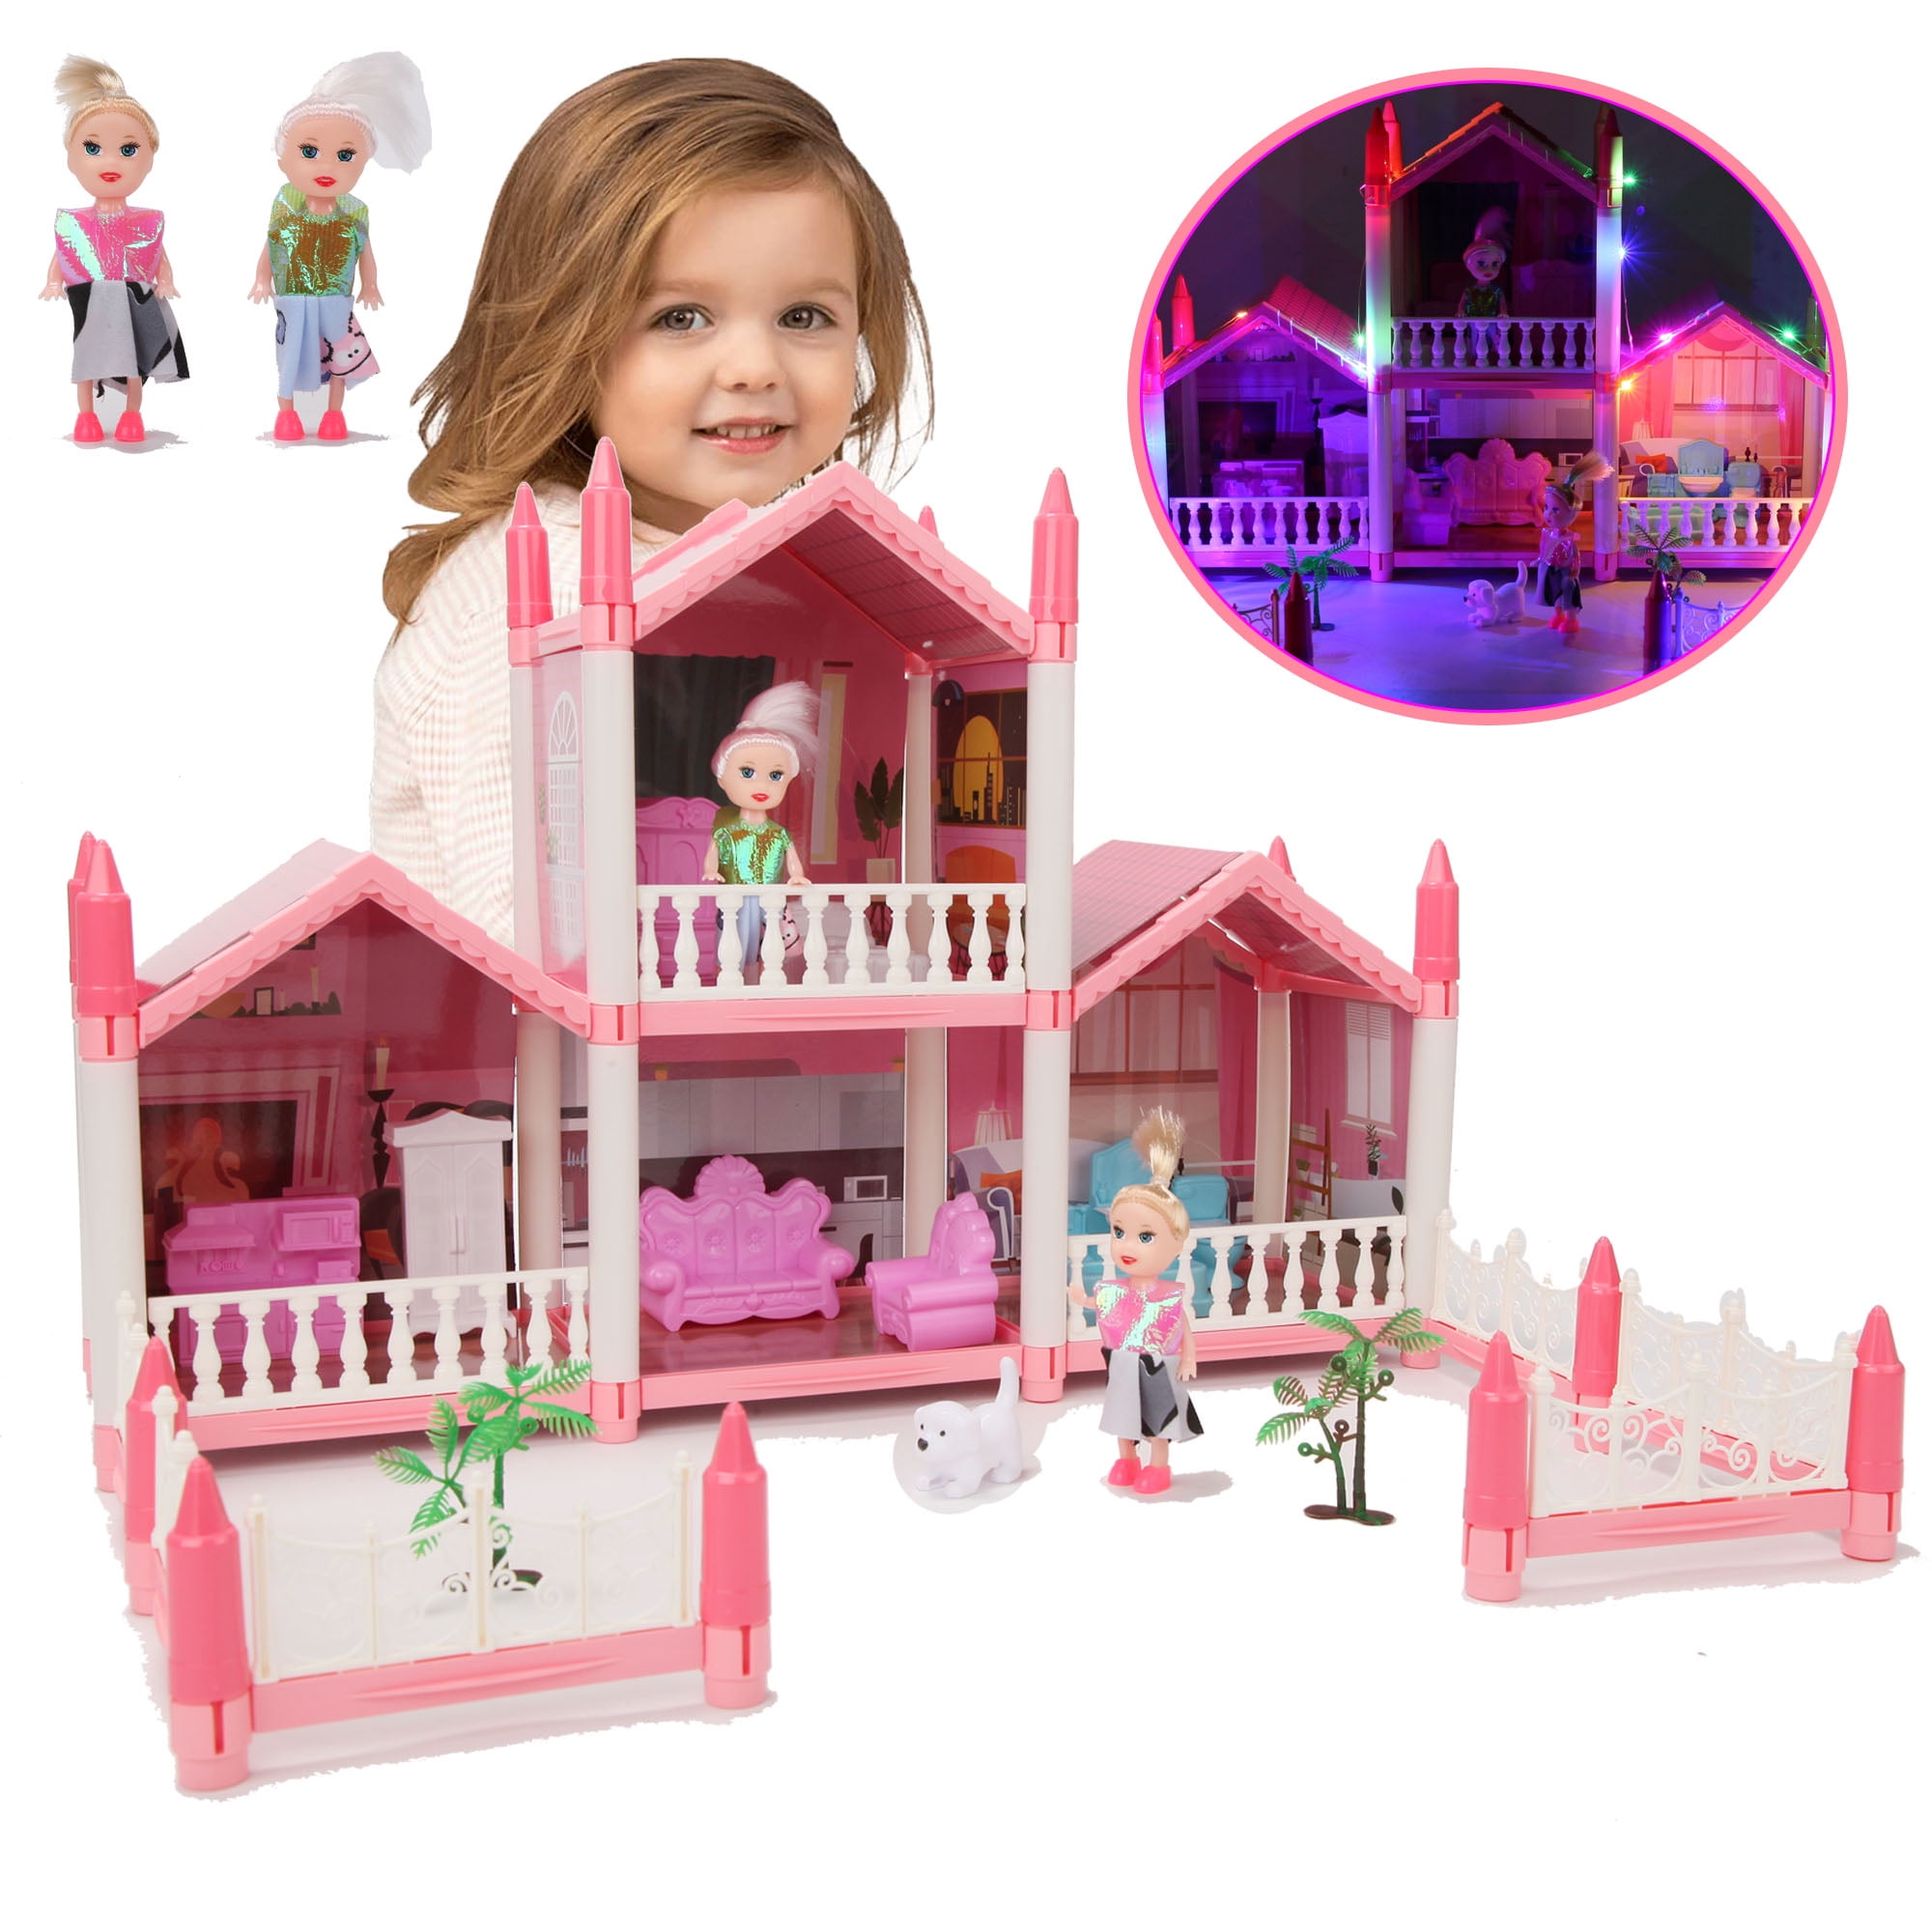 Buy JSR My Deluxe Doll House/Play Set for Girls (50 Pcs) - (Multicolor)  Online at Low Prices in India 